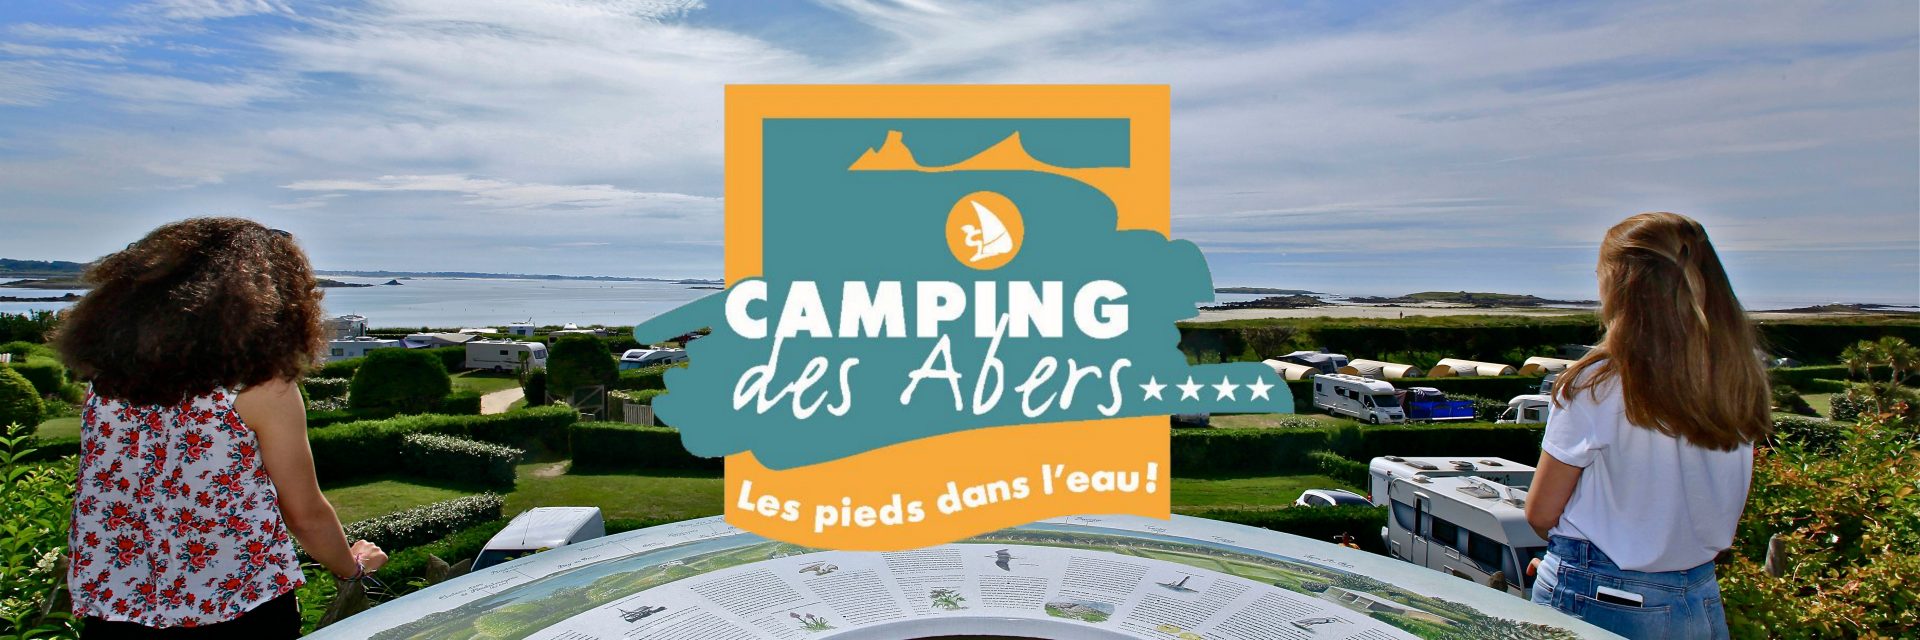 Camping des Abers 